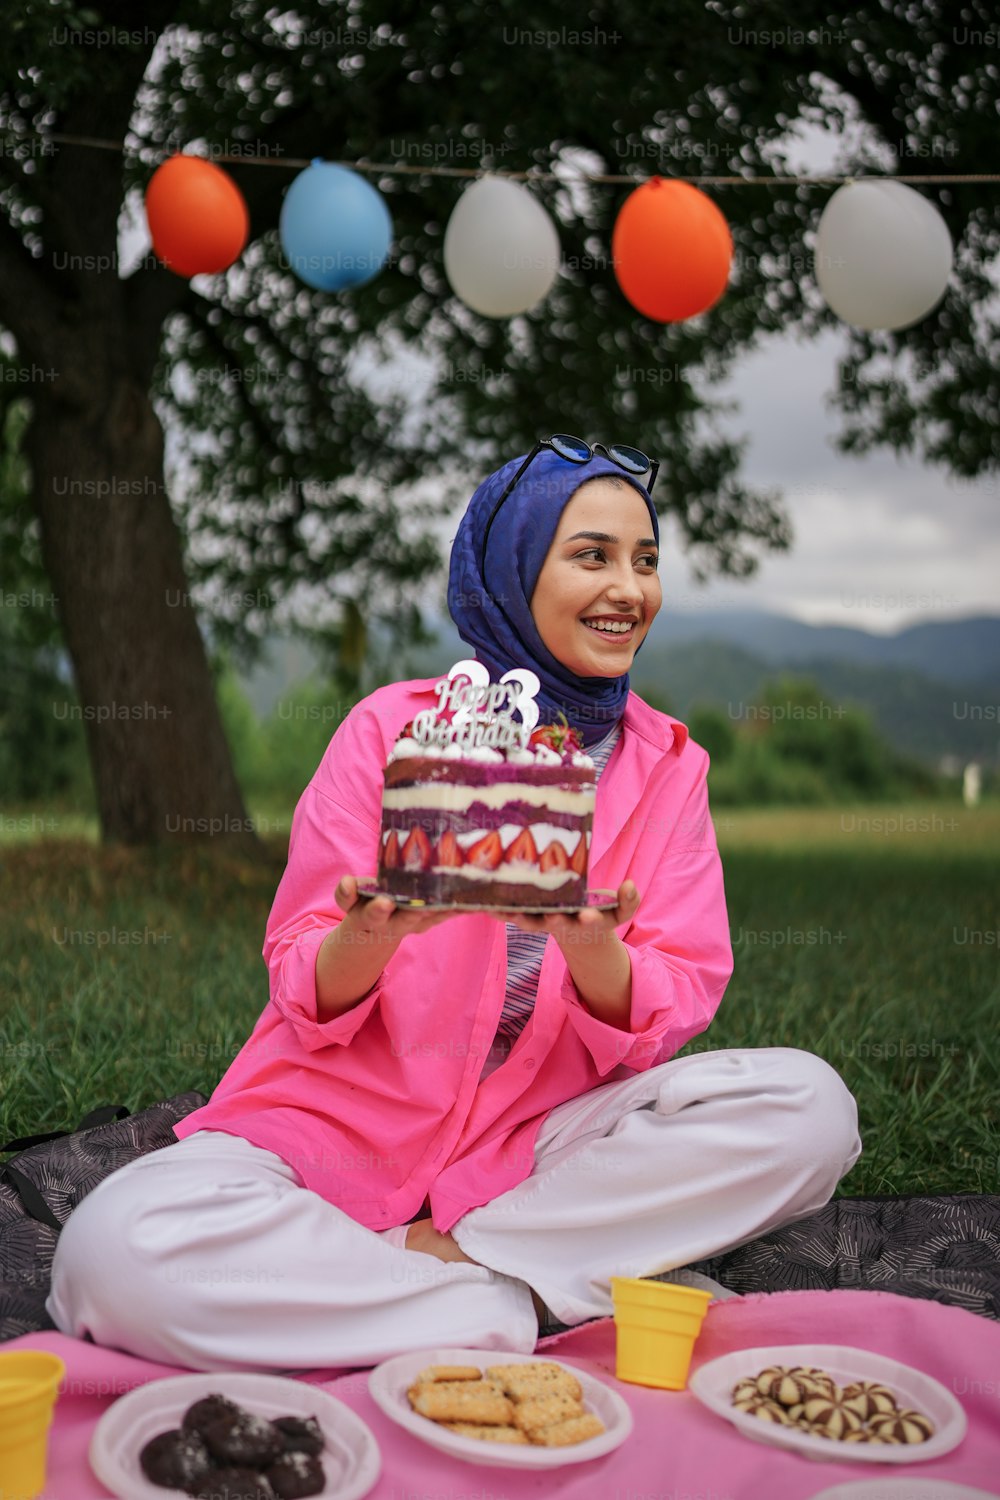 a woman sitting on a blanket holding a piece of cake